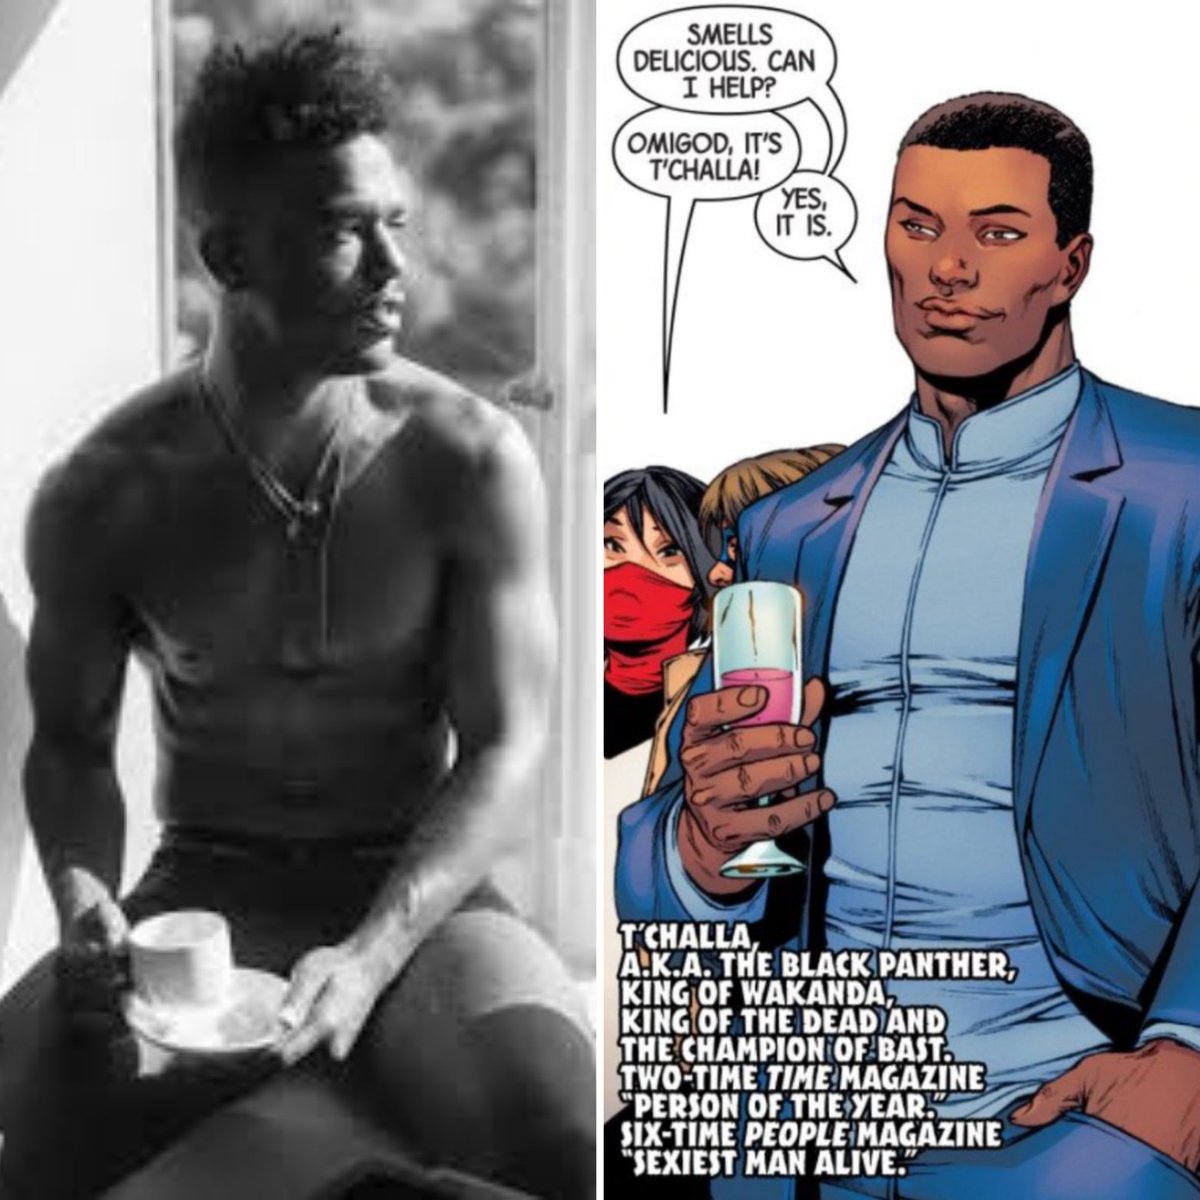 Ok I'm about to violate one of my #Fancasting rules re: age: I typically, depending on the character, suggest actors in their late 20s/early 30s for superhero roles, BUT how bout 40 y.o. Luke James as THE #BlackPanther T'Challa, son of T'Chaka? He has the look.. #RecastTChalla